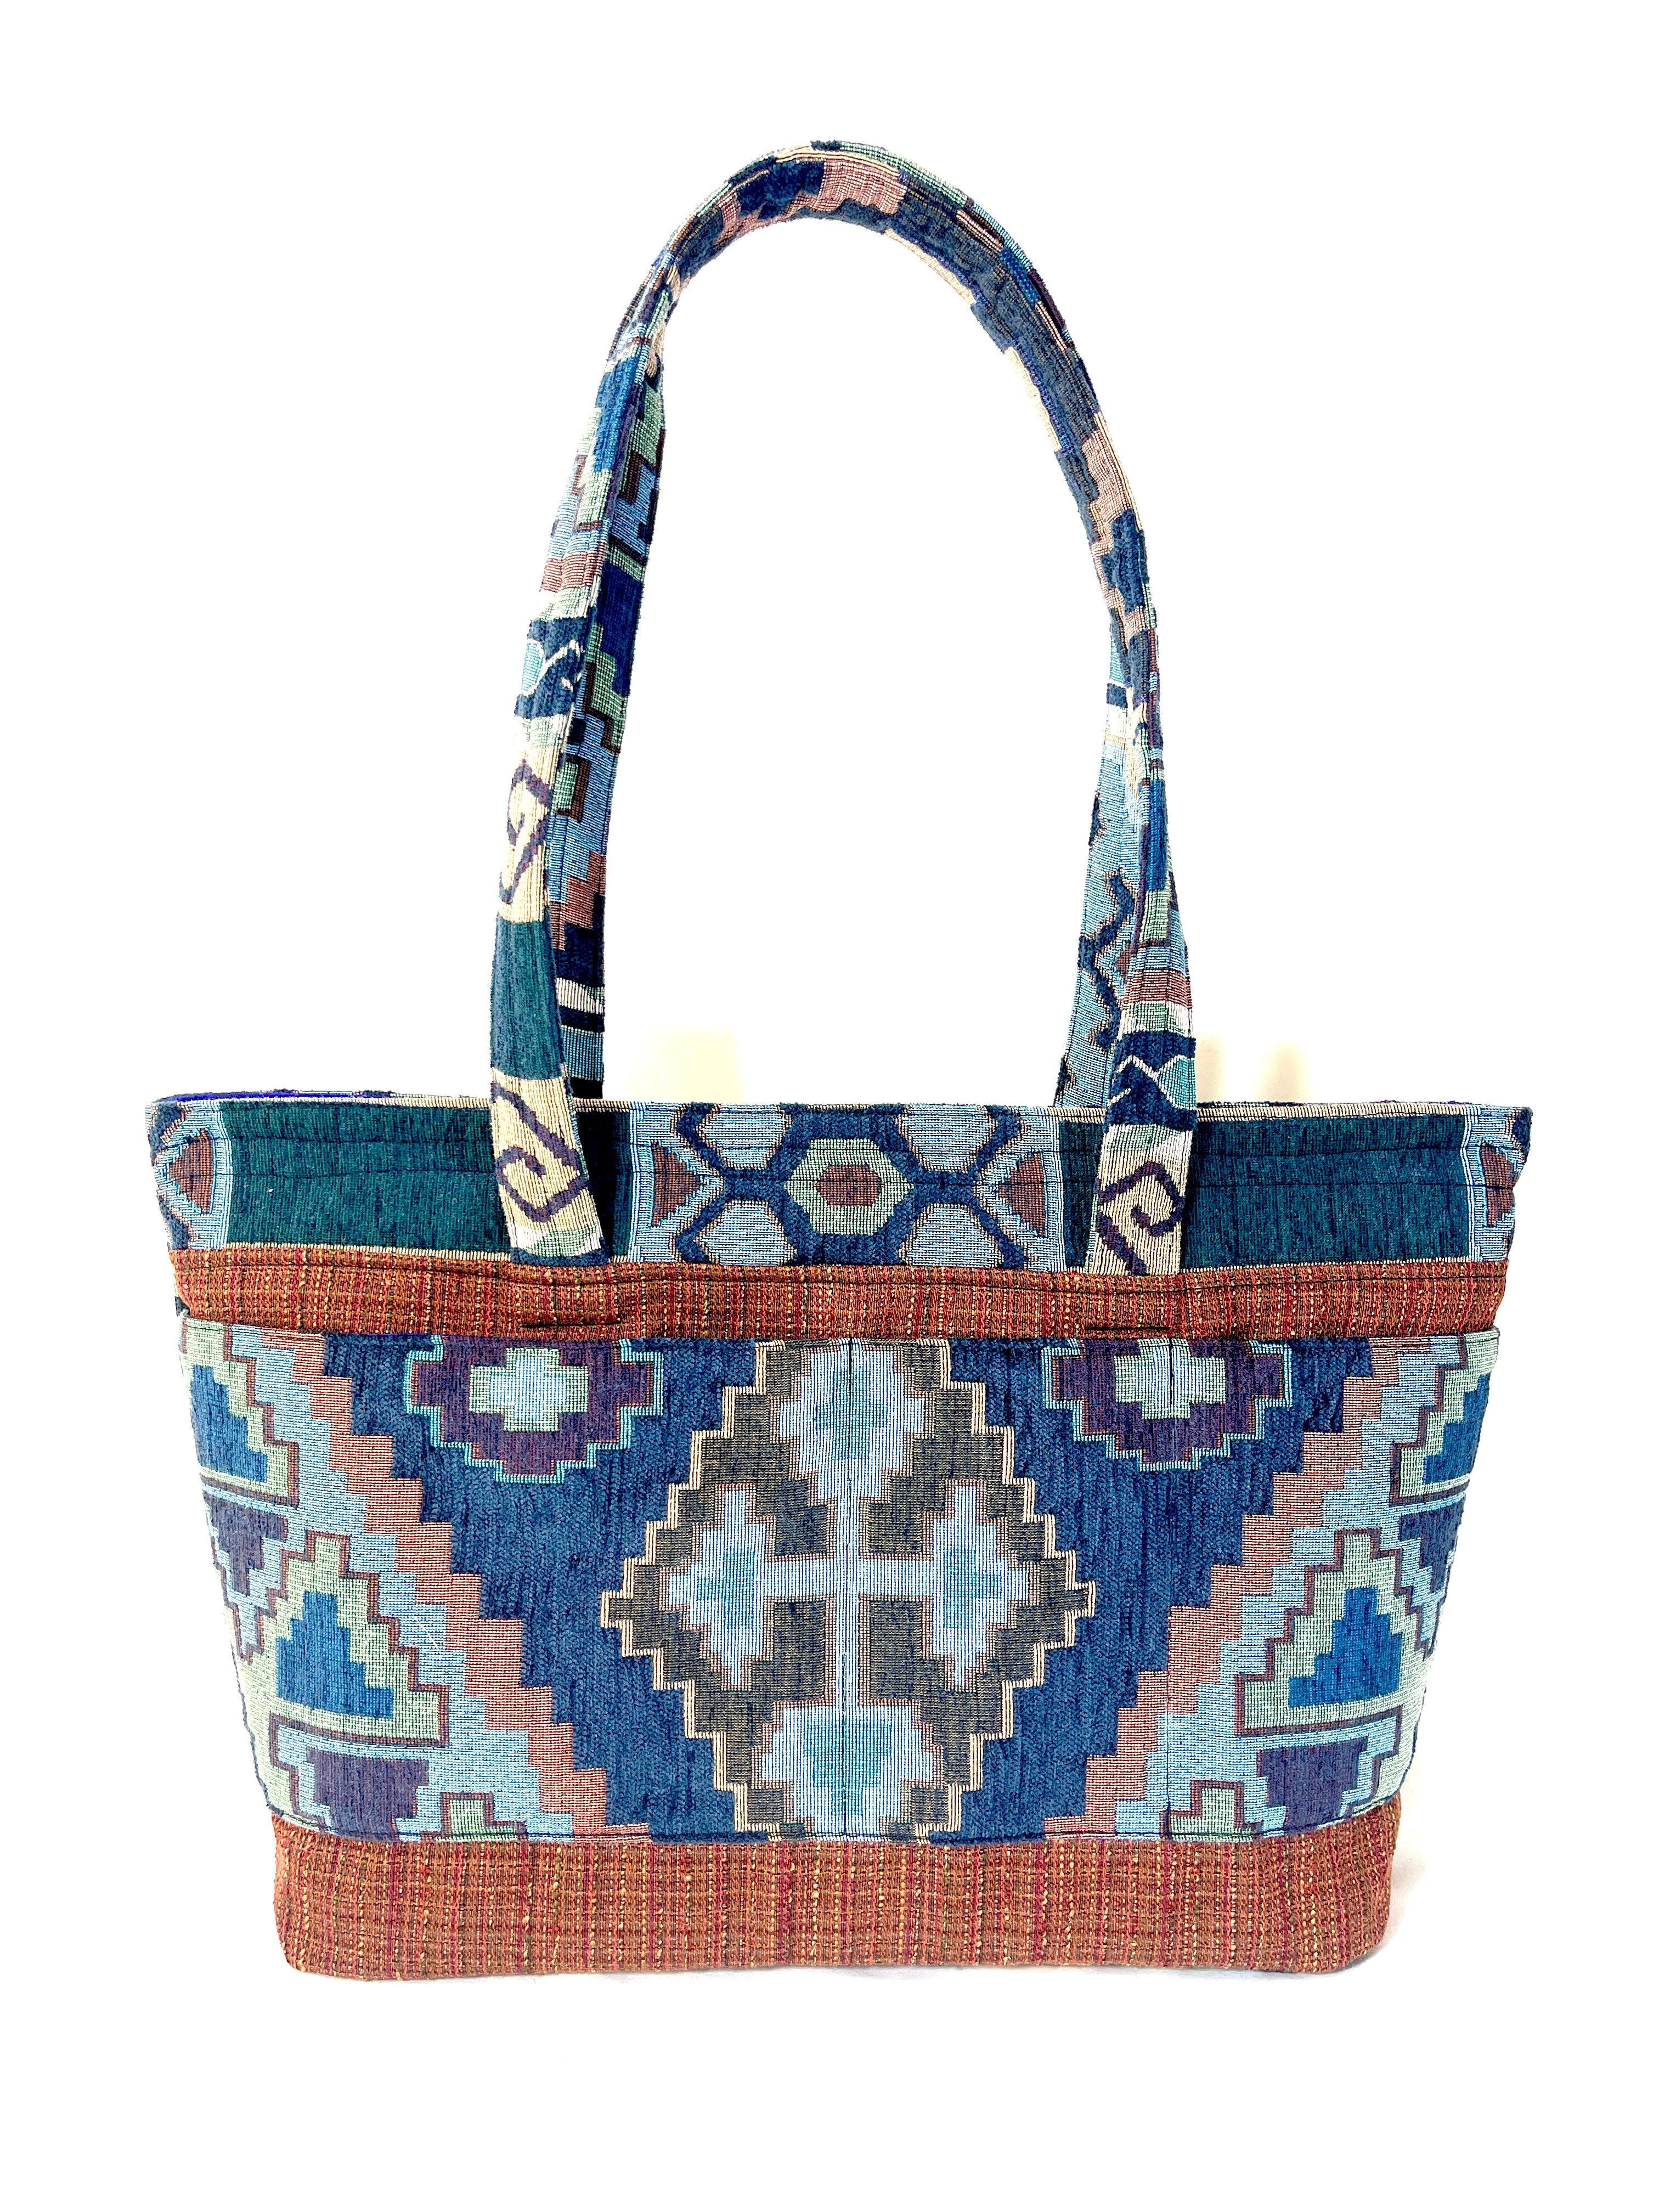 Marilyn Bag in Geometric Tapestry and Russet Jacquard